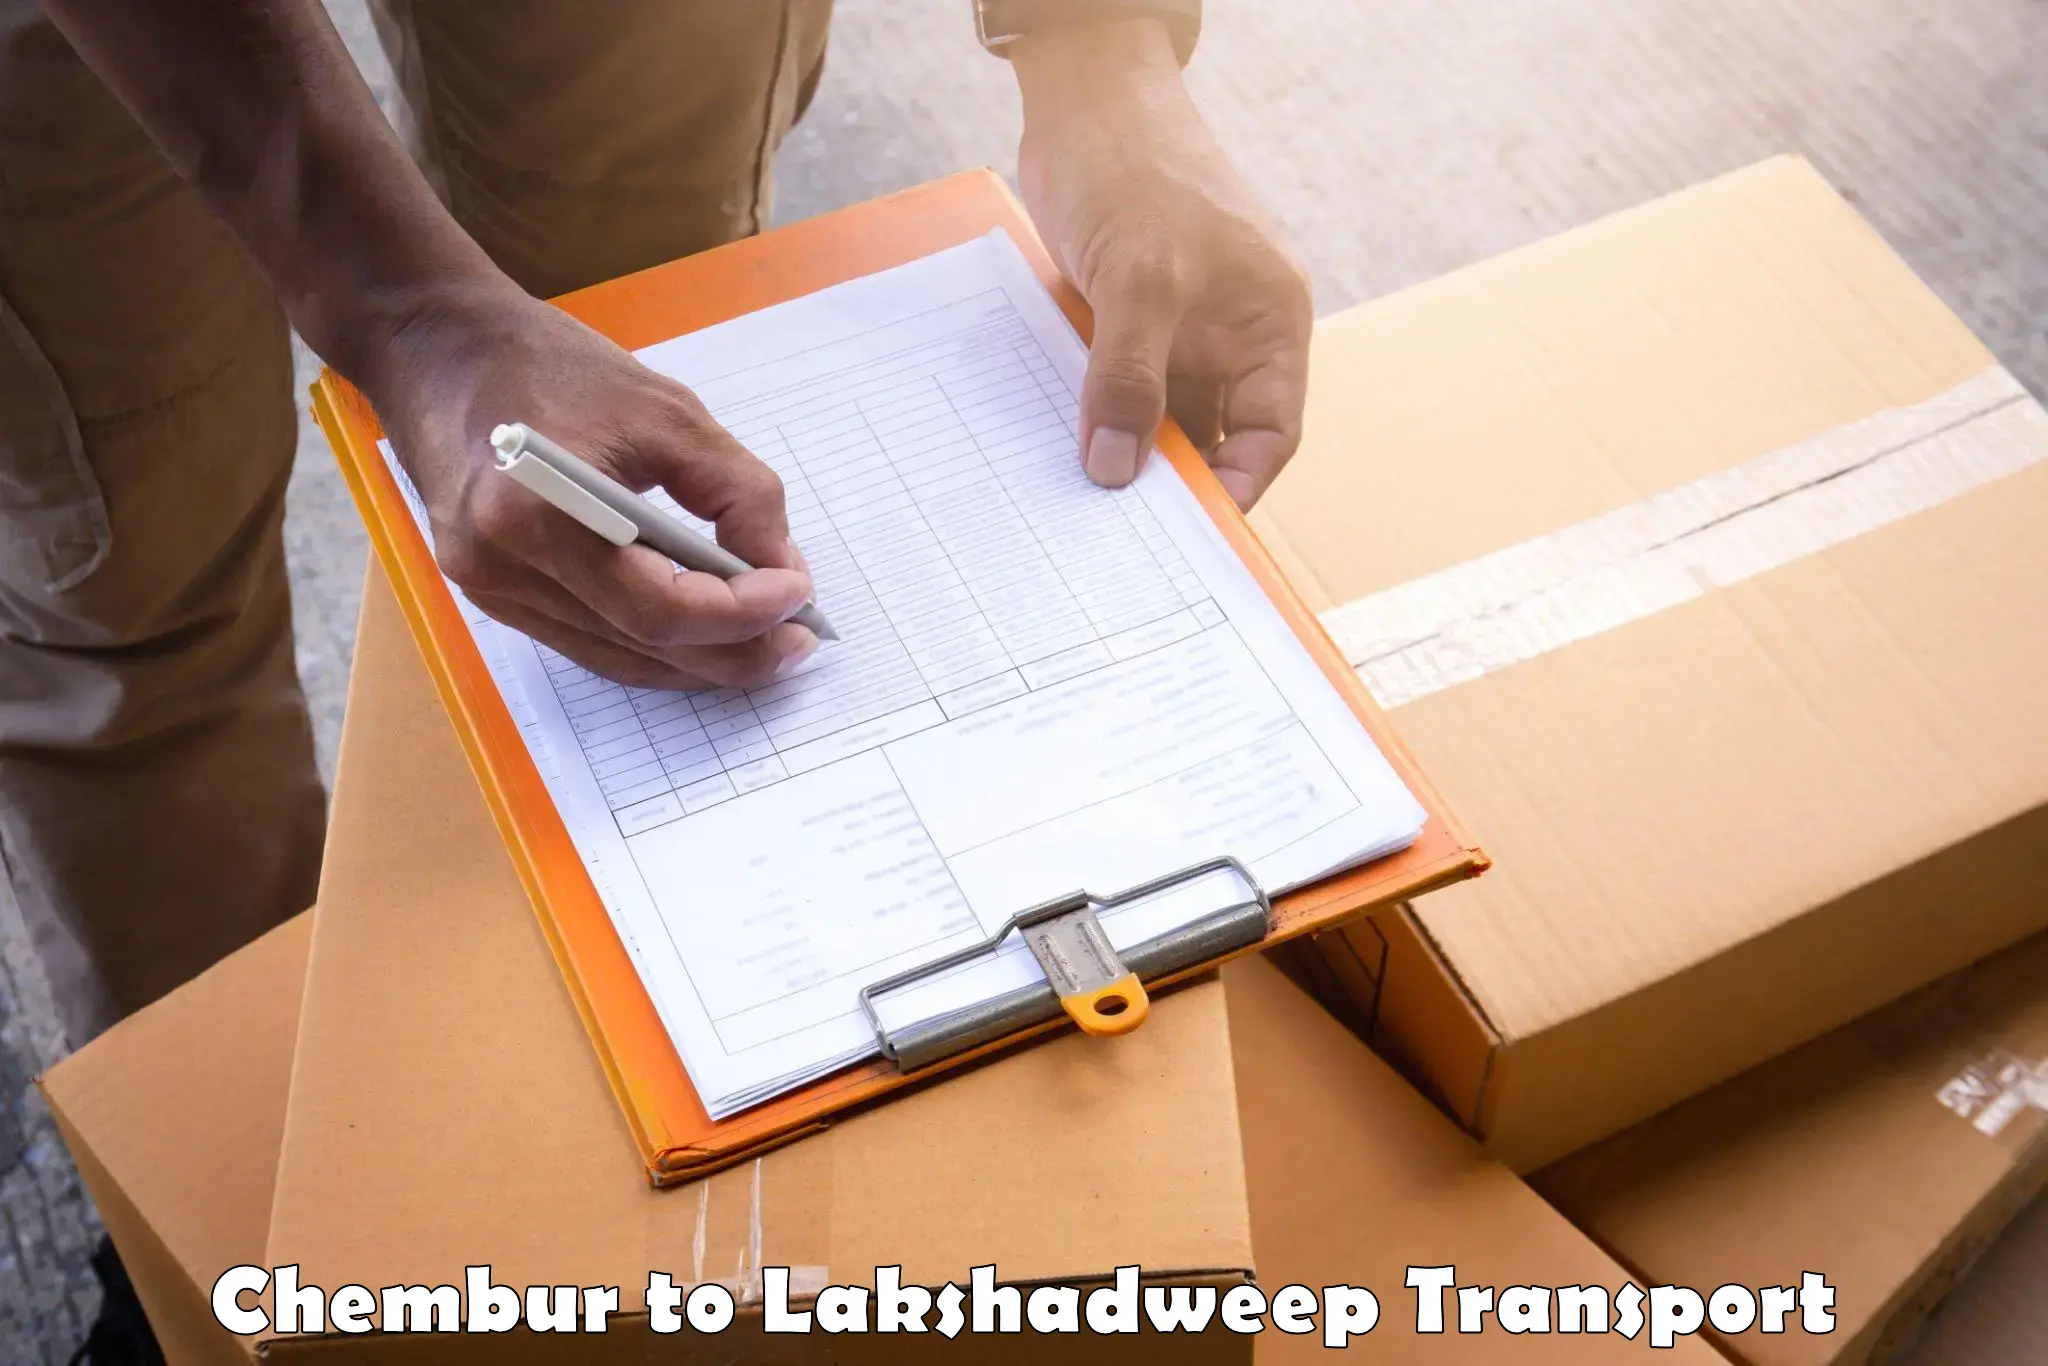 Delivery service Chembur to Lakshadweep